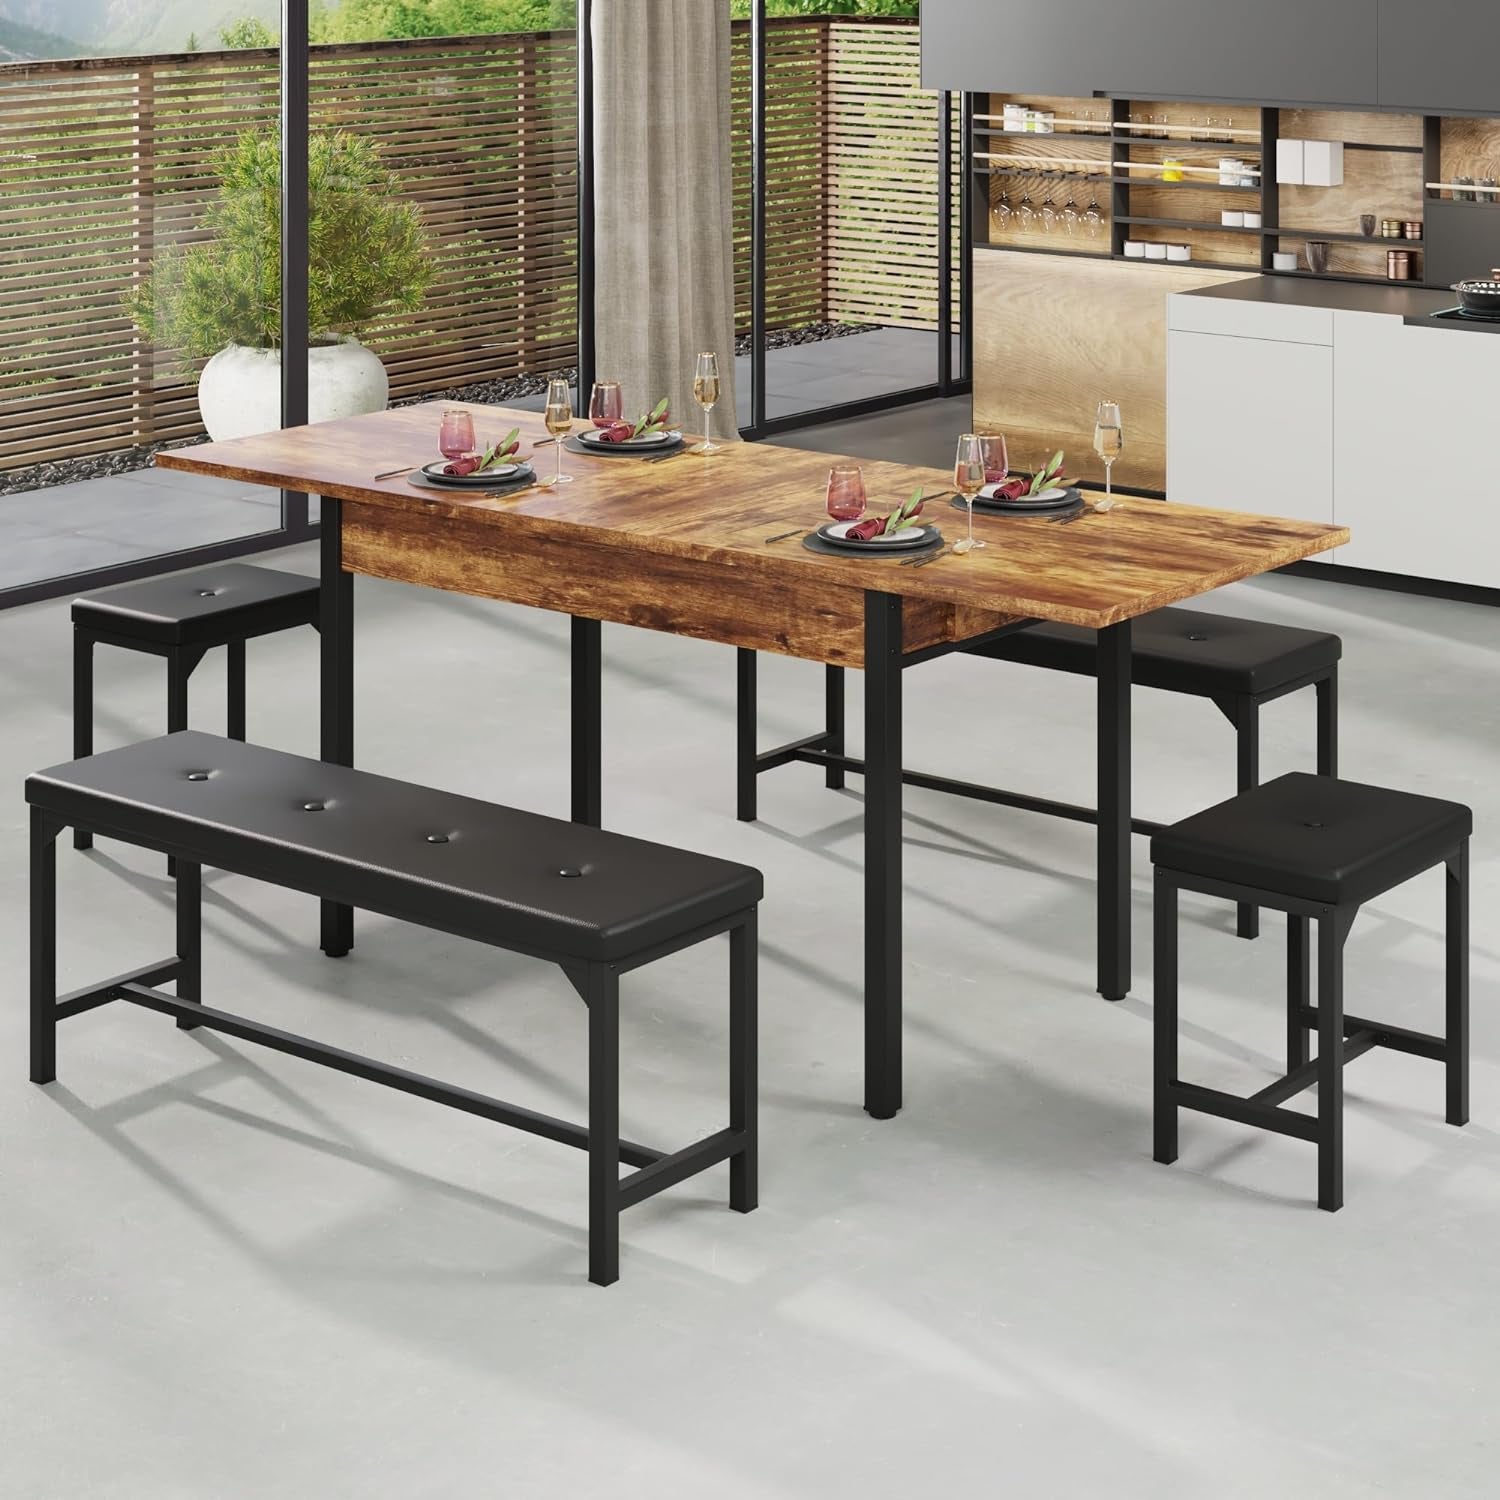 5-Piece Dining Table Set, Kitchen Table Set with Metal Frame & Wooden Board for 4-8, 63